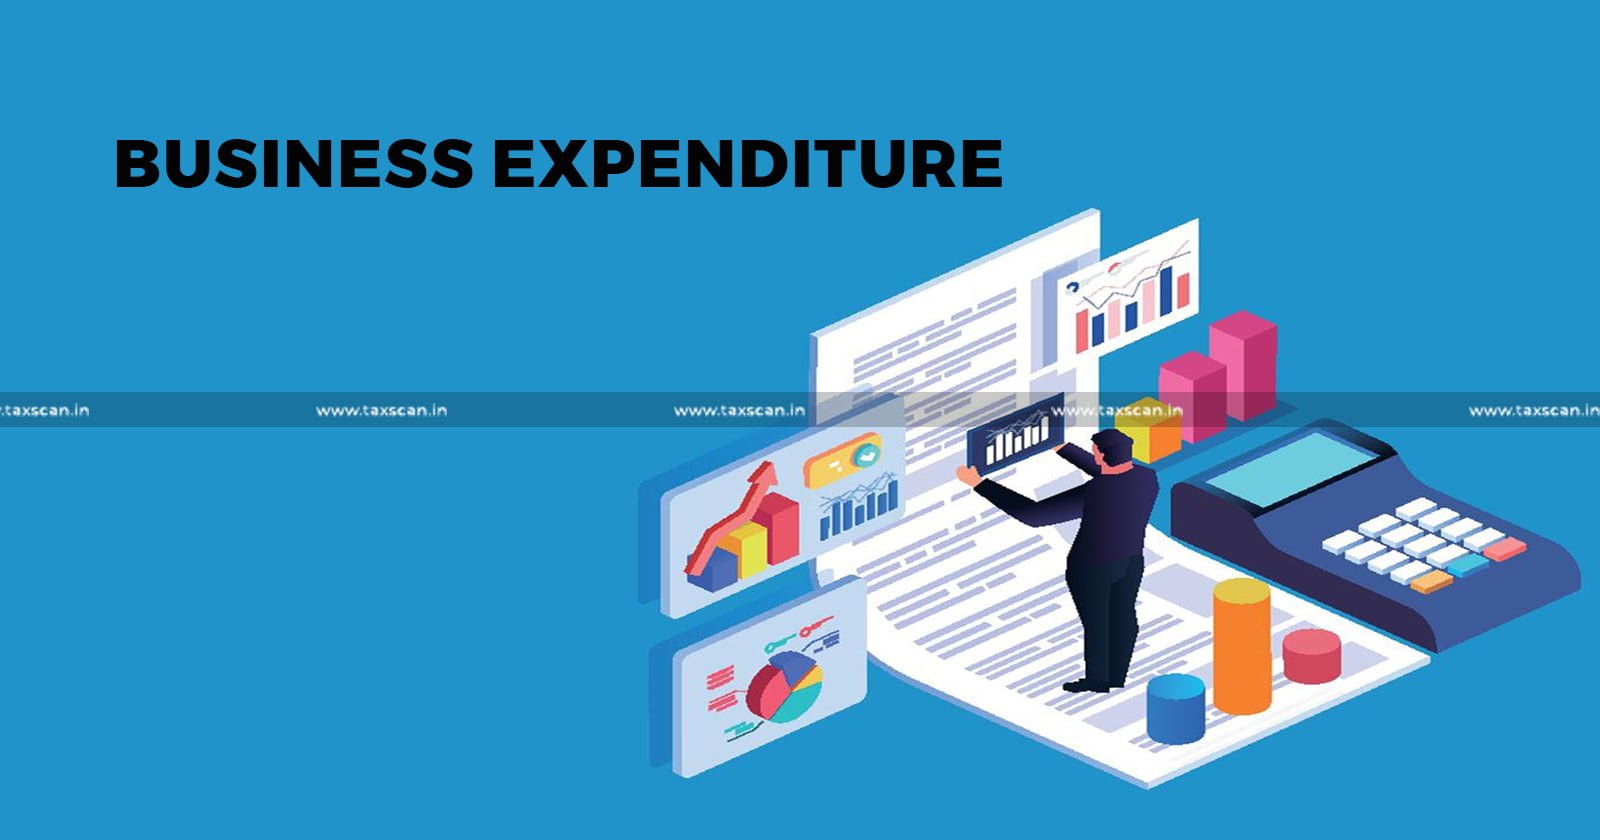 Ceremonial Expenses - Tradition - Allowable Business Expenditure - Business Expenditure - ITAT - Taxscan